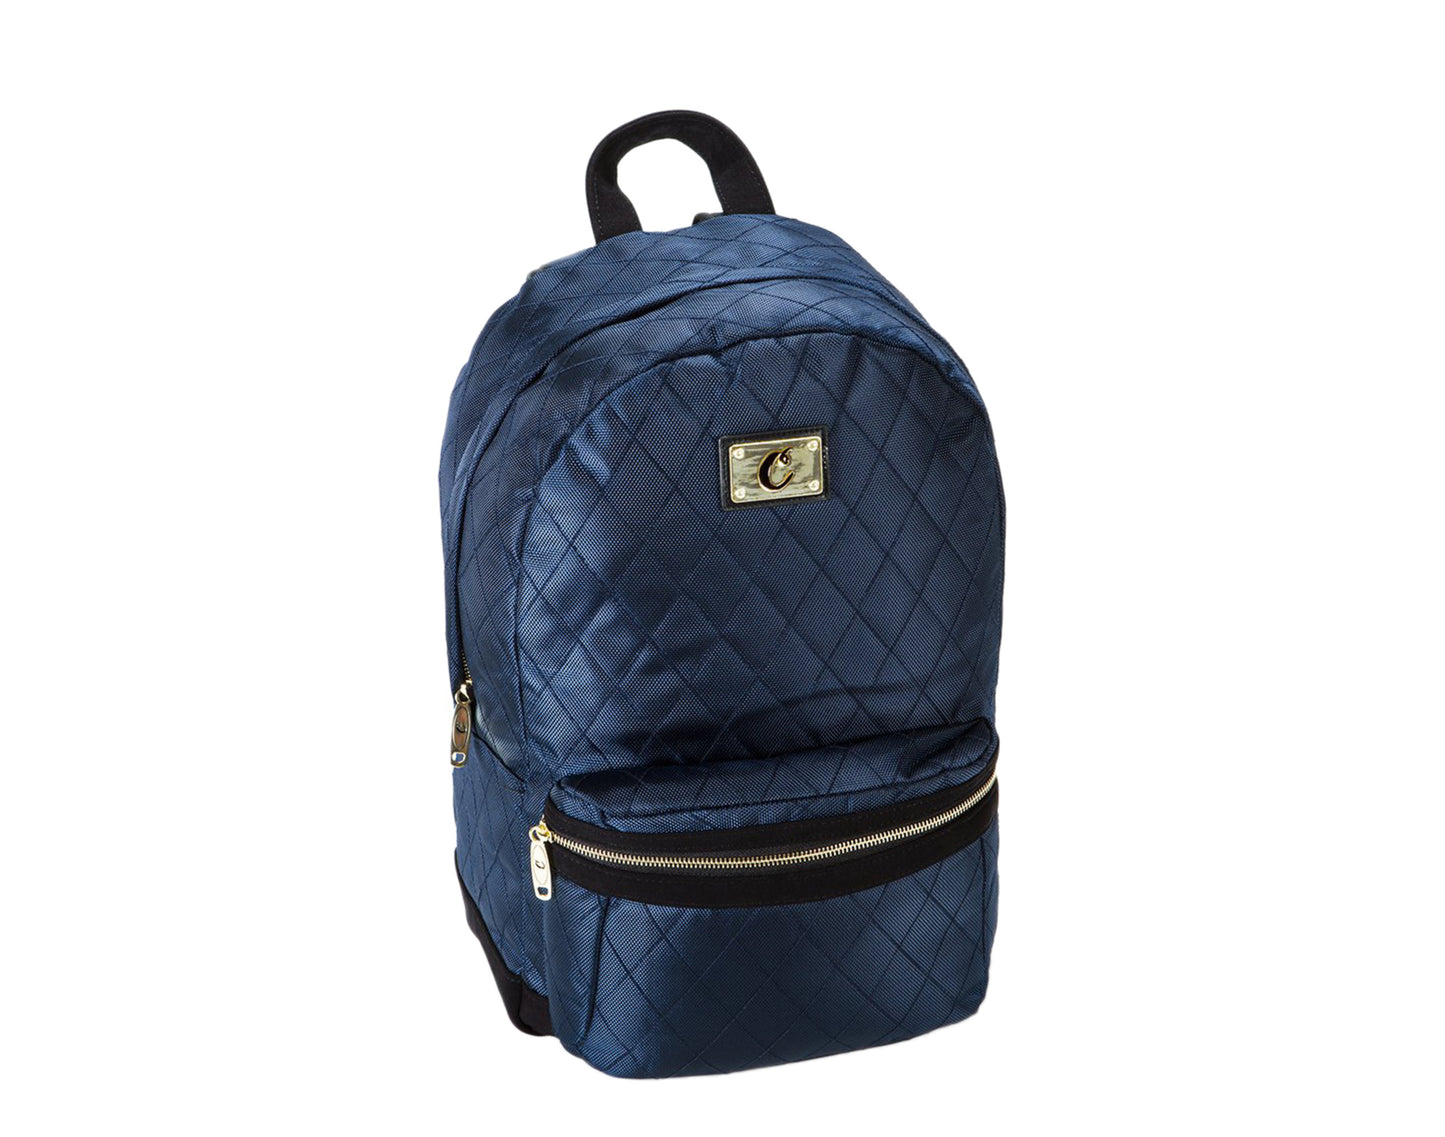 Cookies V3 Quilted Nylon Smell Proof Navy Backpack 1546A4394-NAV